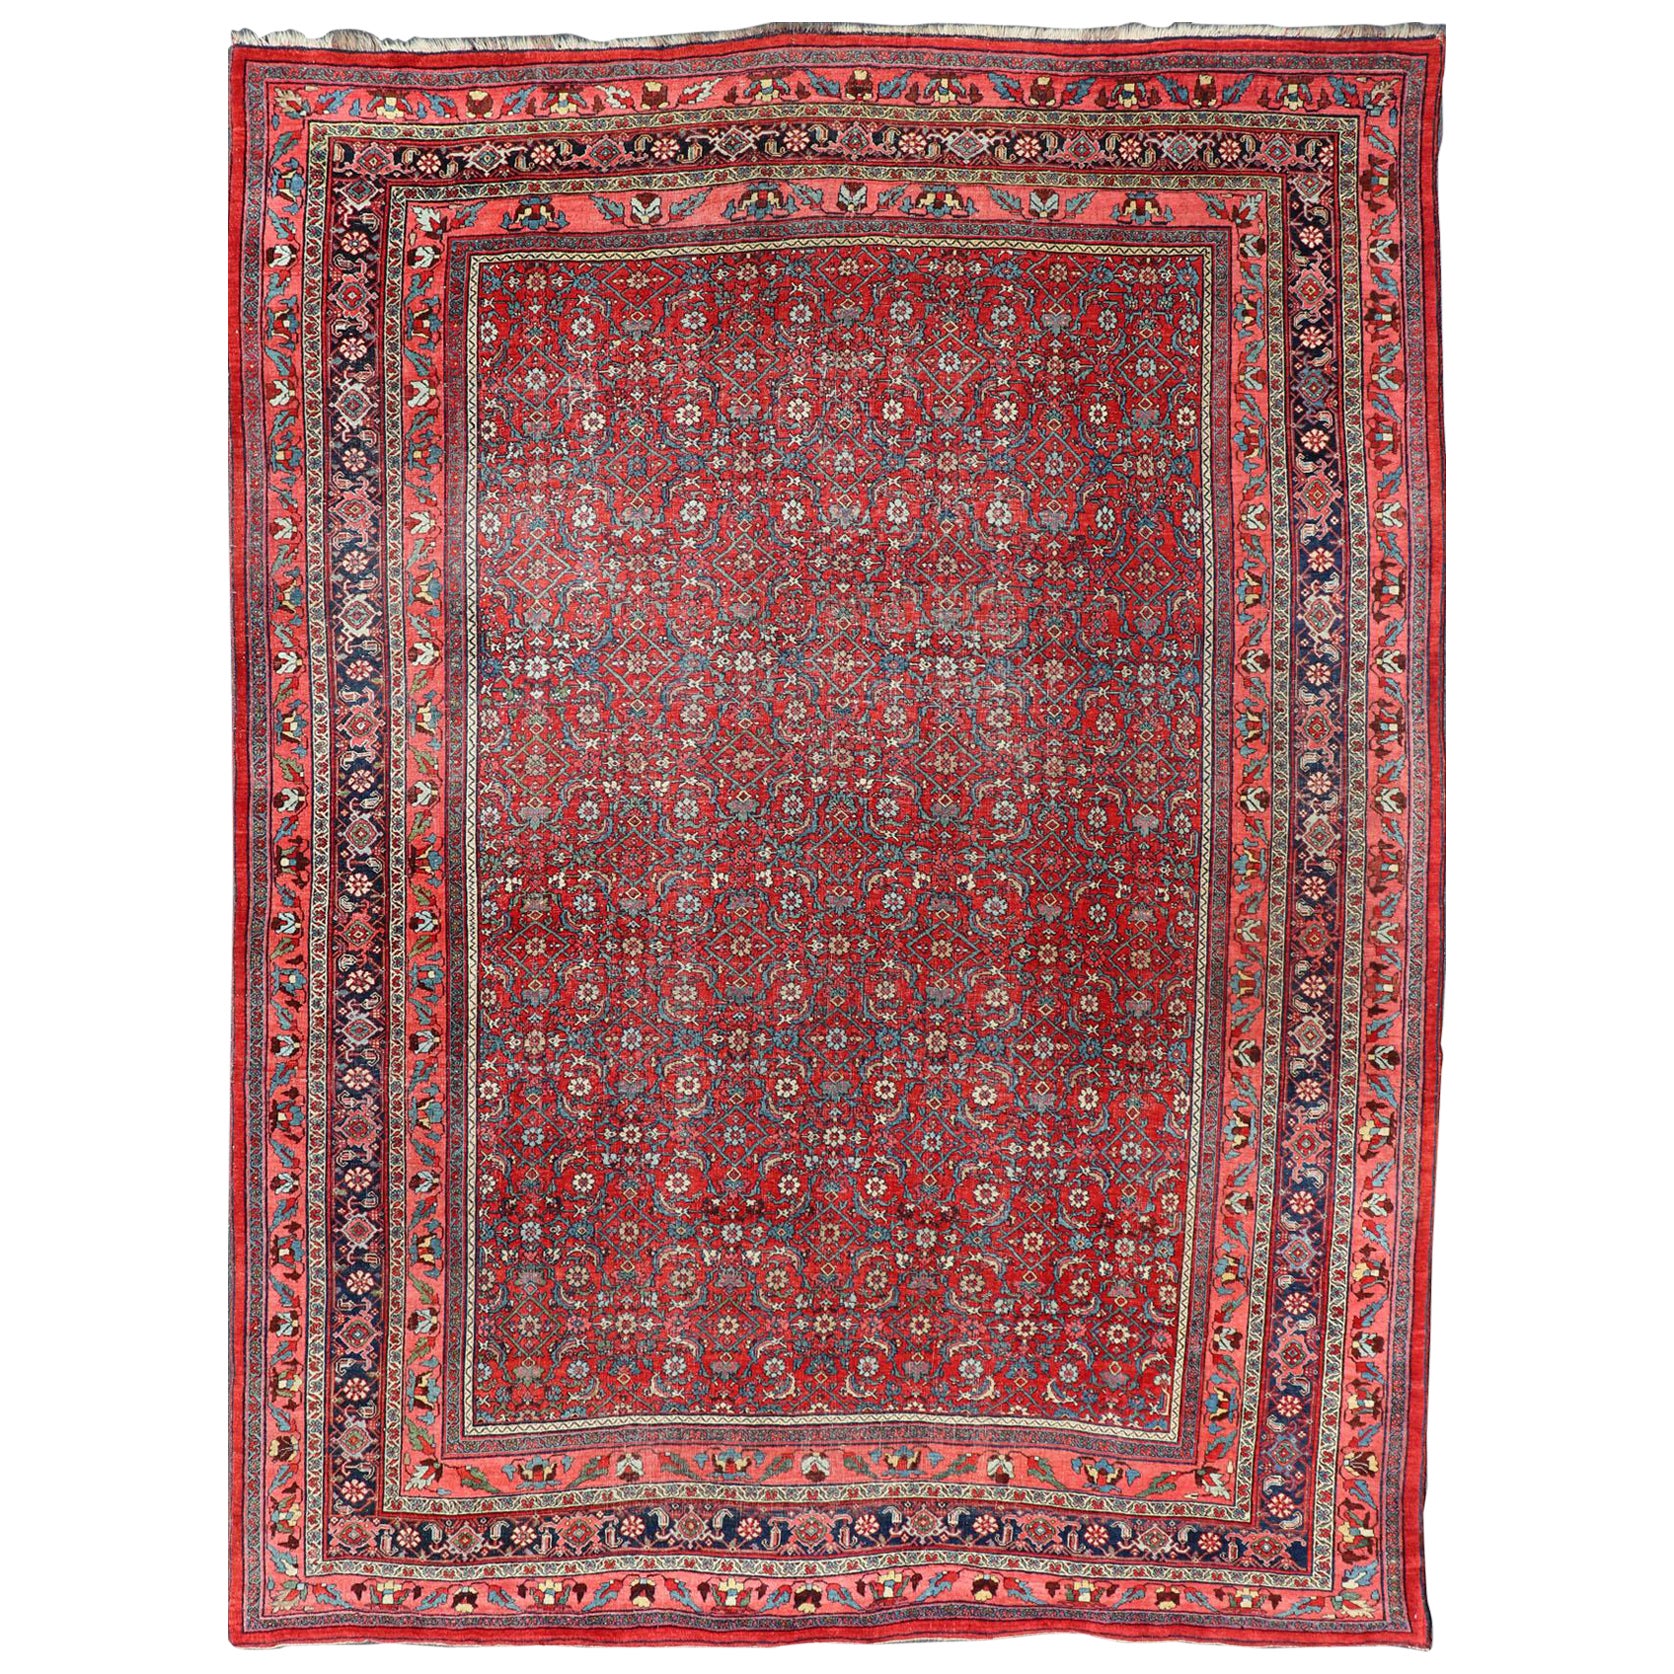 Antique Large Persian Bidjar Rug with All-Over Design in Red and Blue